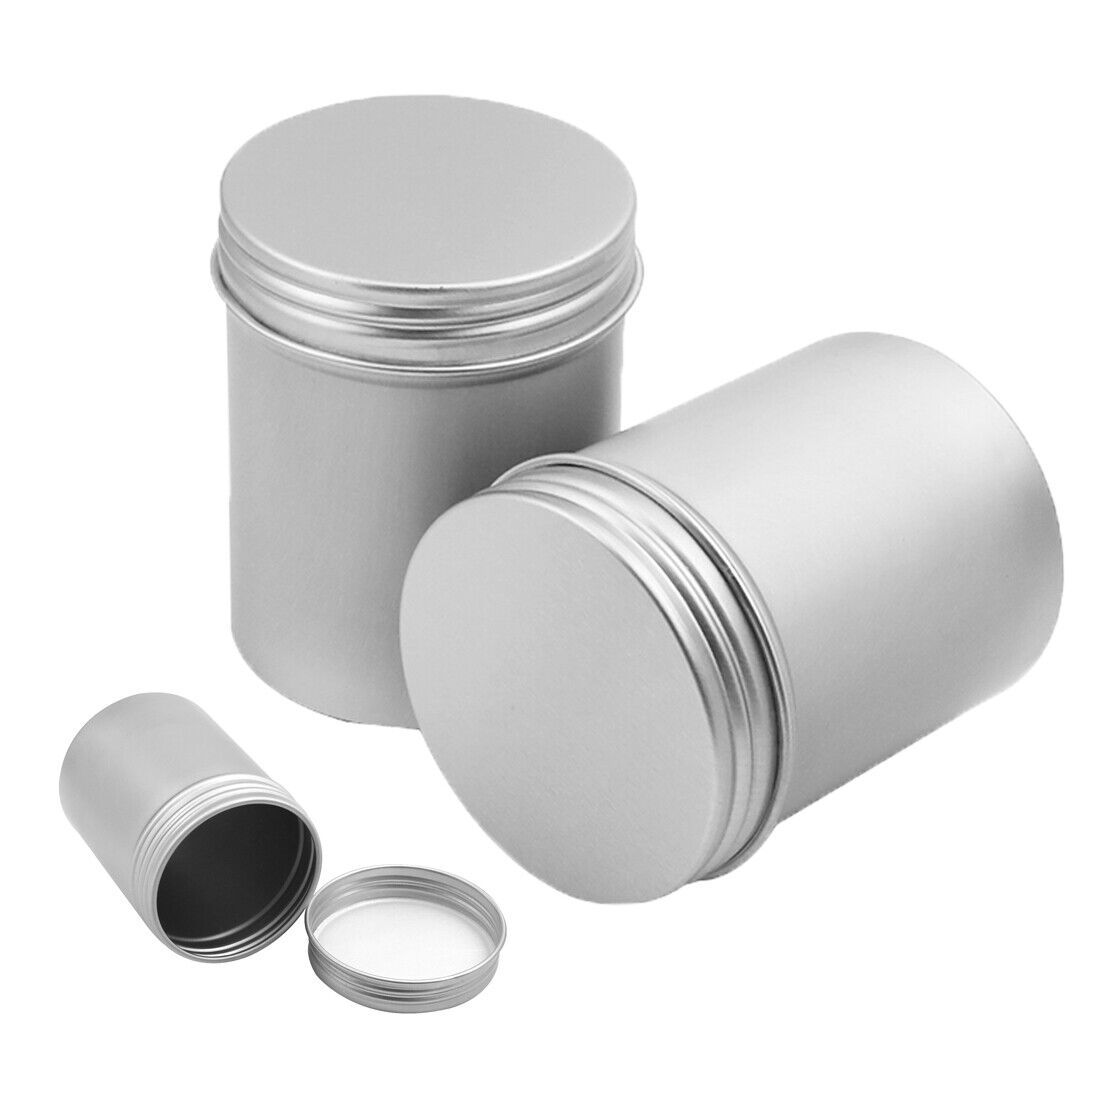 Screw top tins_Round tin can with lid screw lid